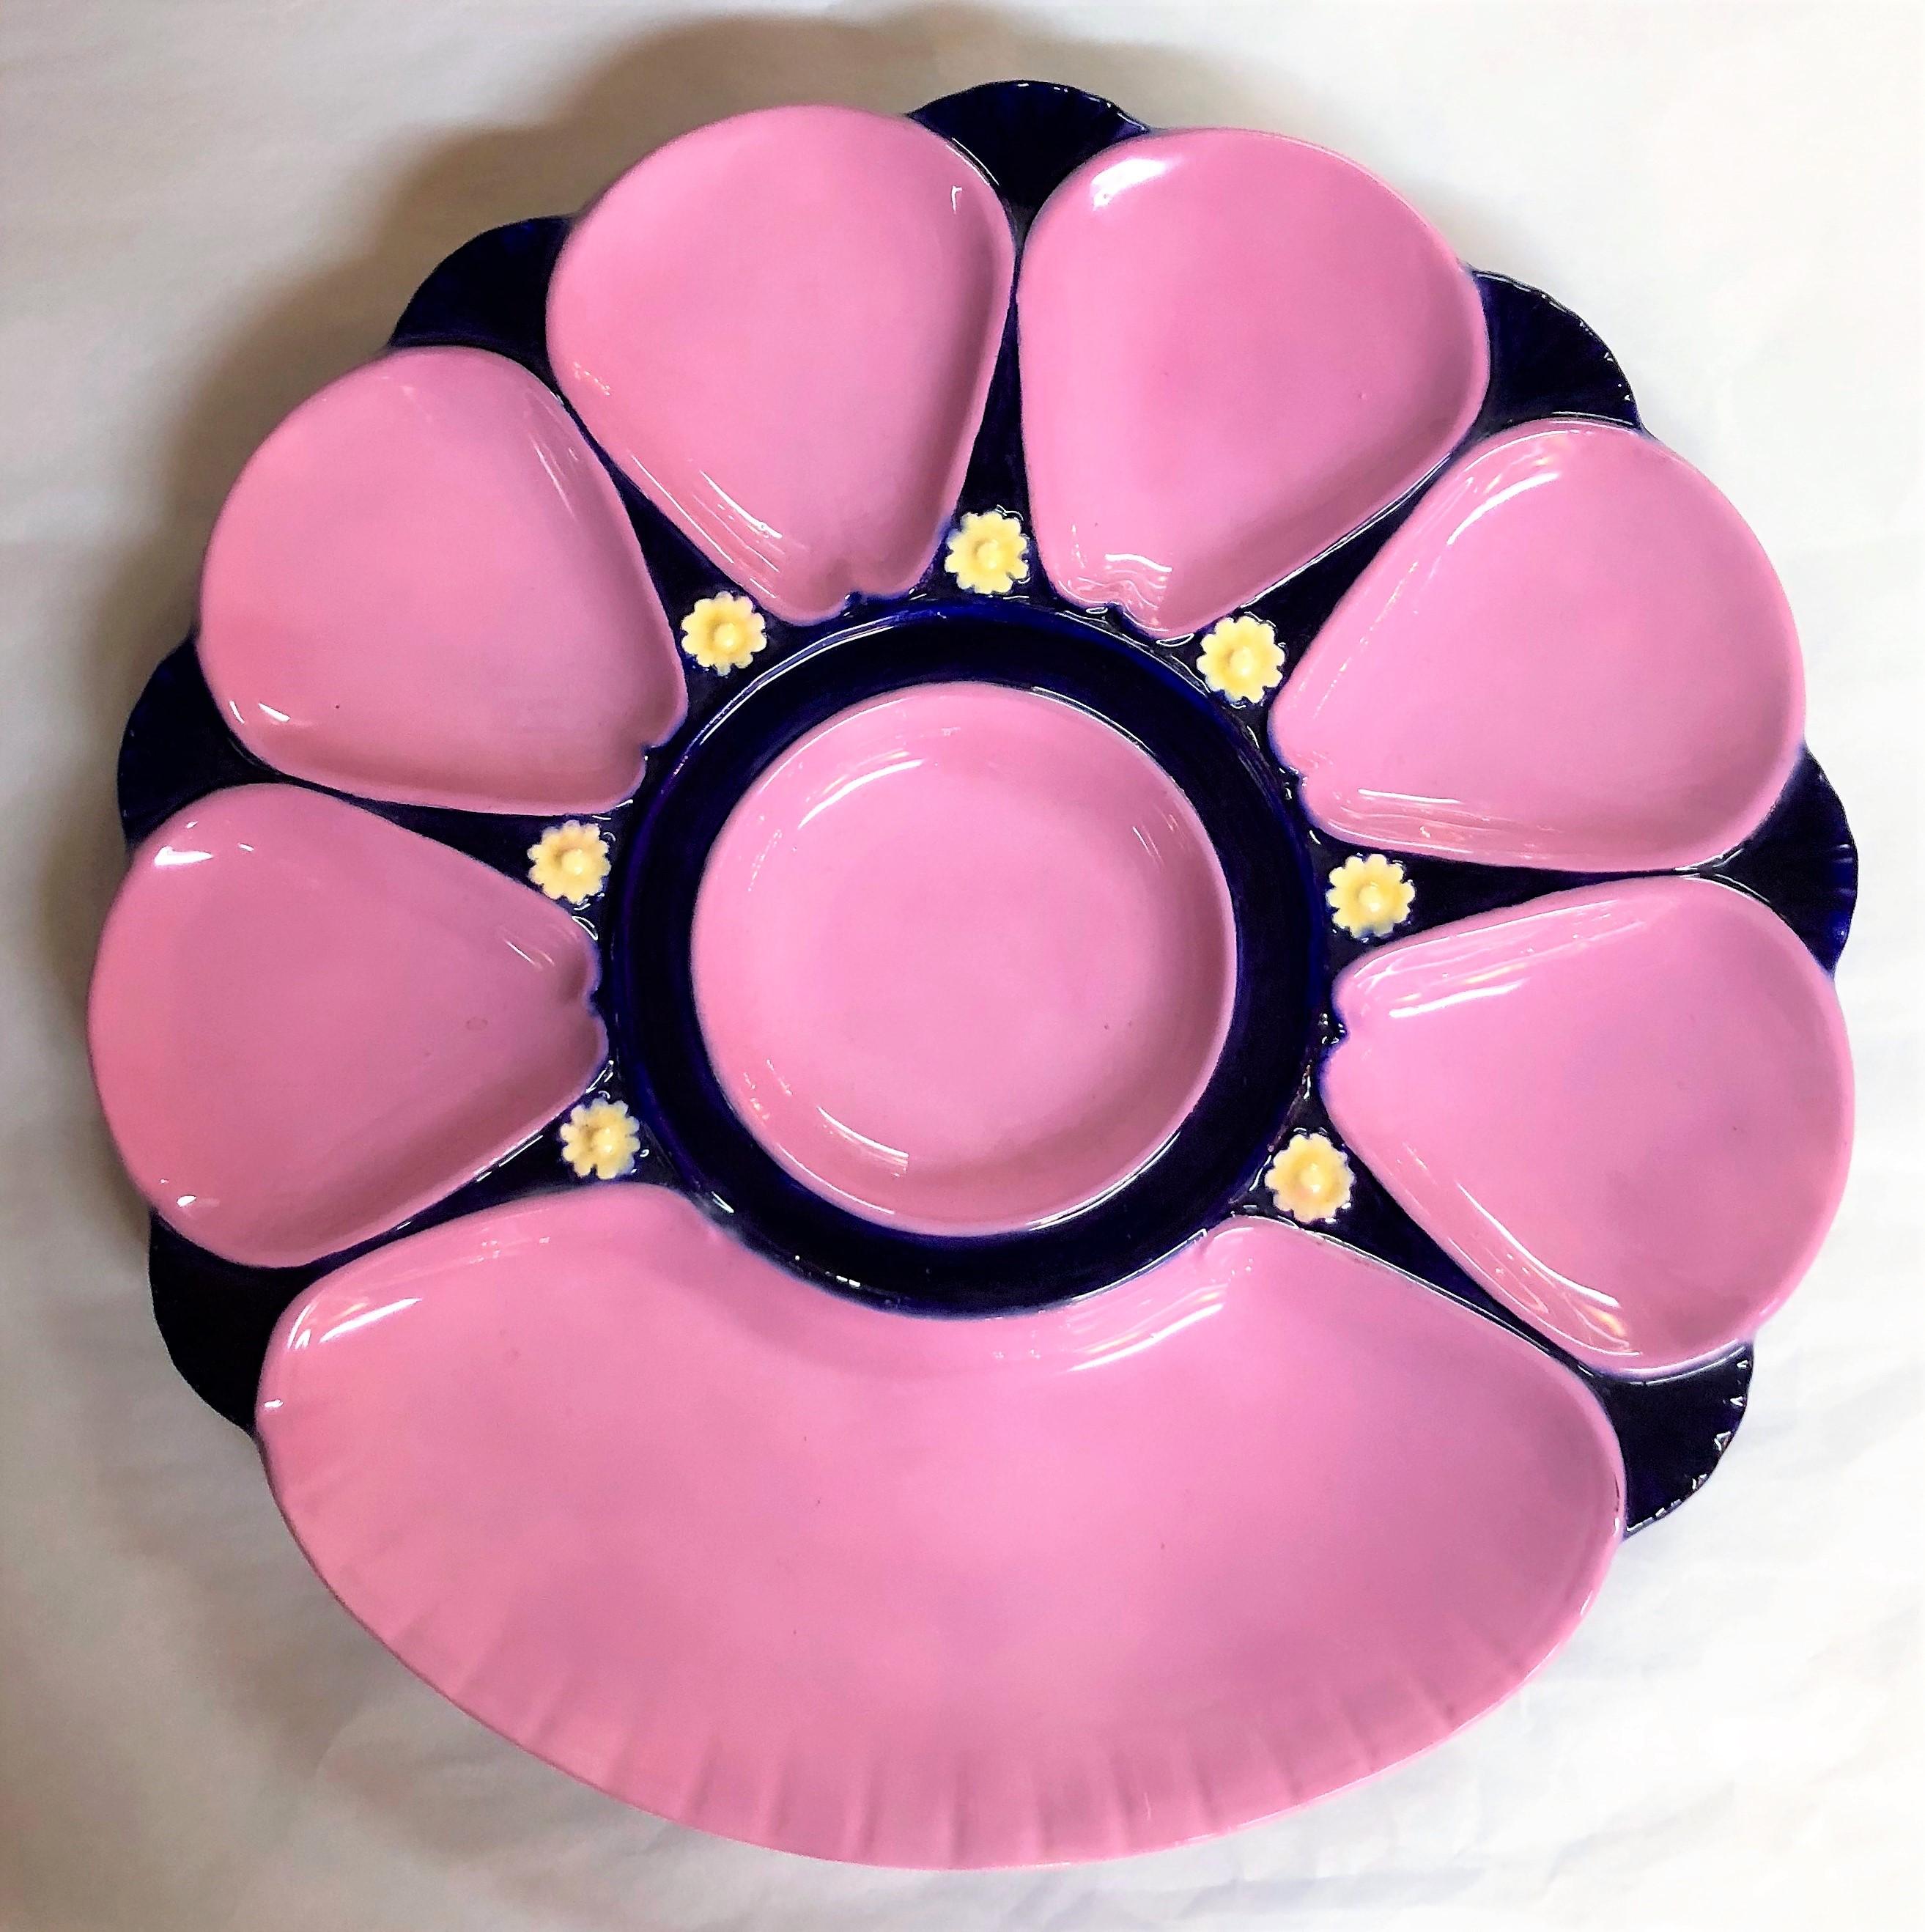 Antique English Minton Majolica oyster plate in a rare pink and blue color with a large cracker-well design, circa 1890.